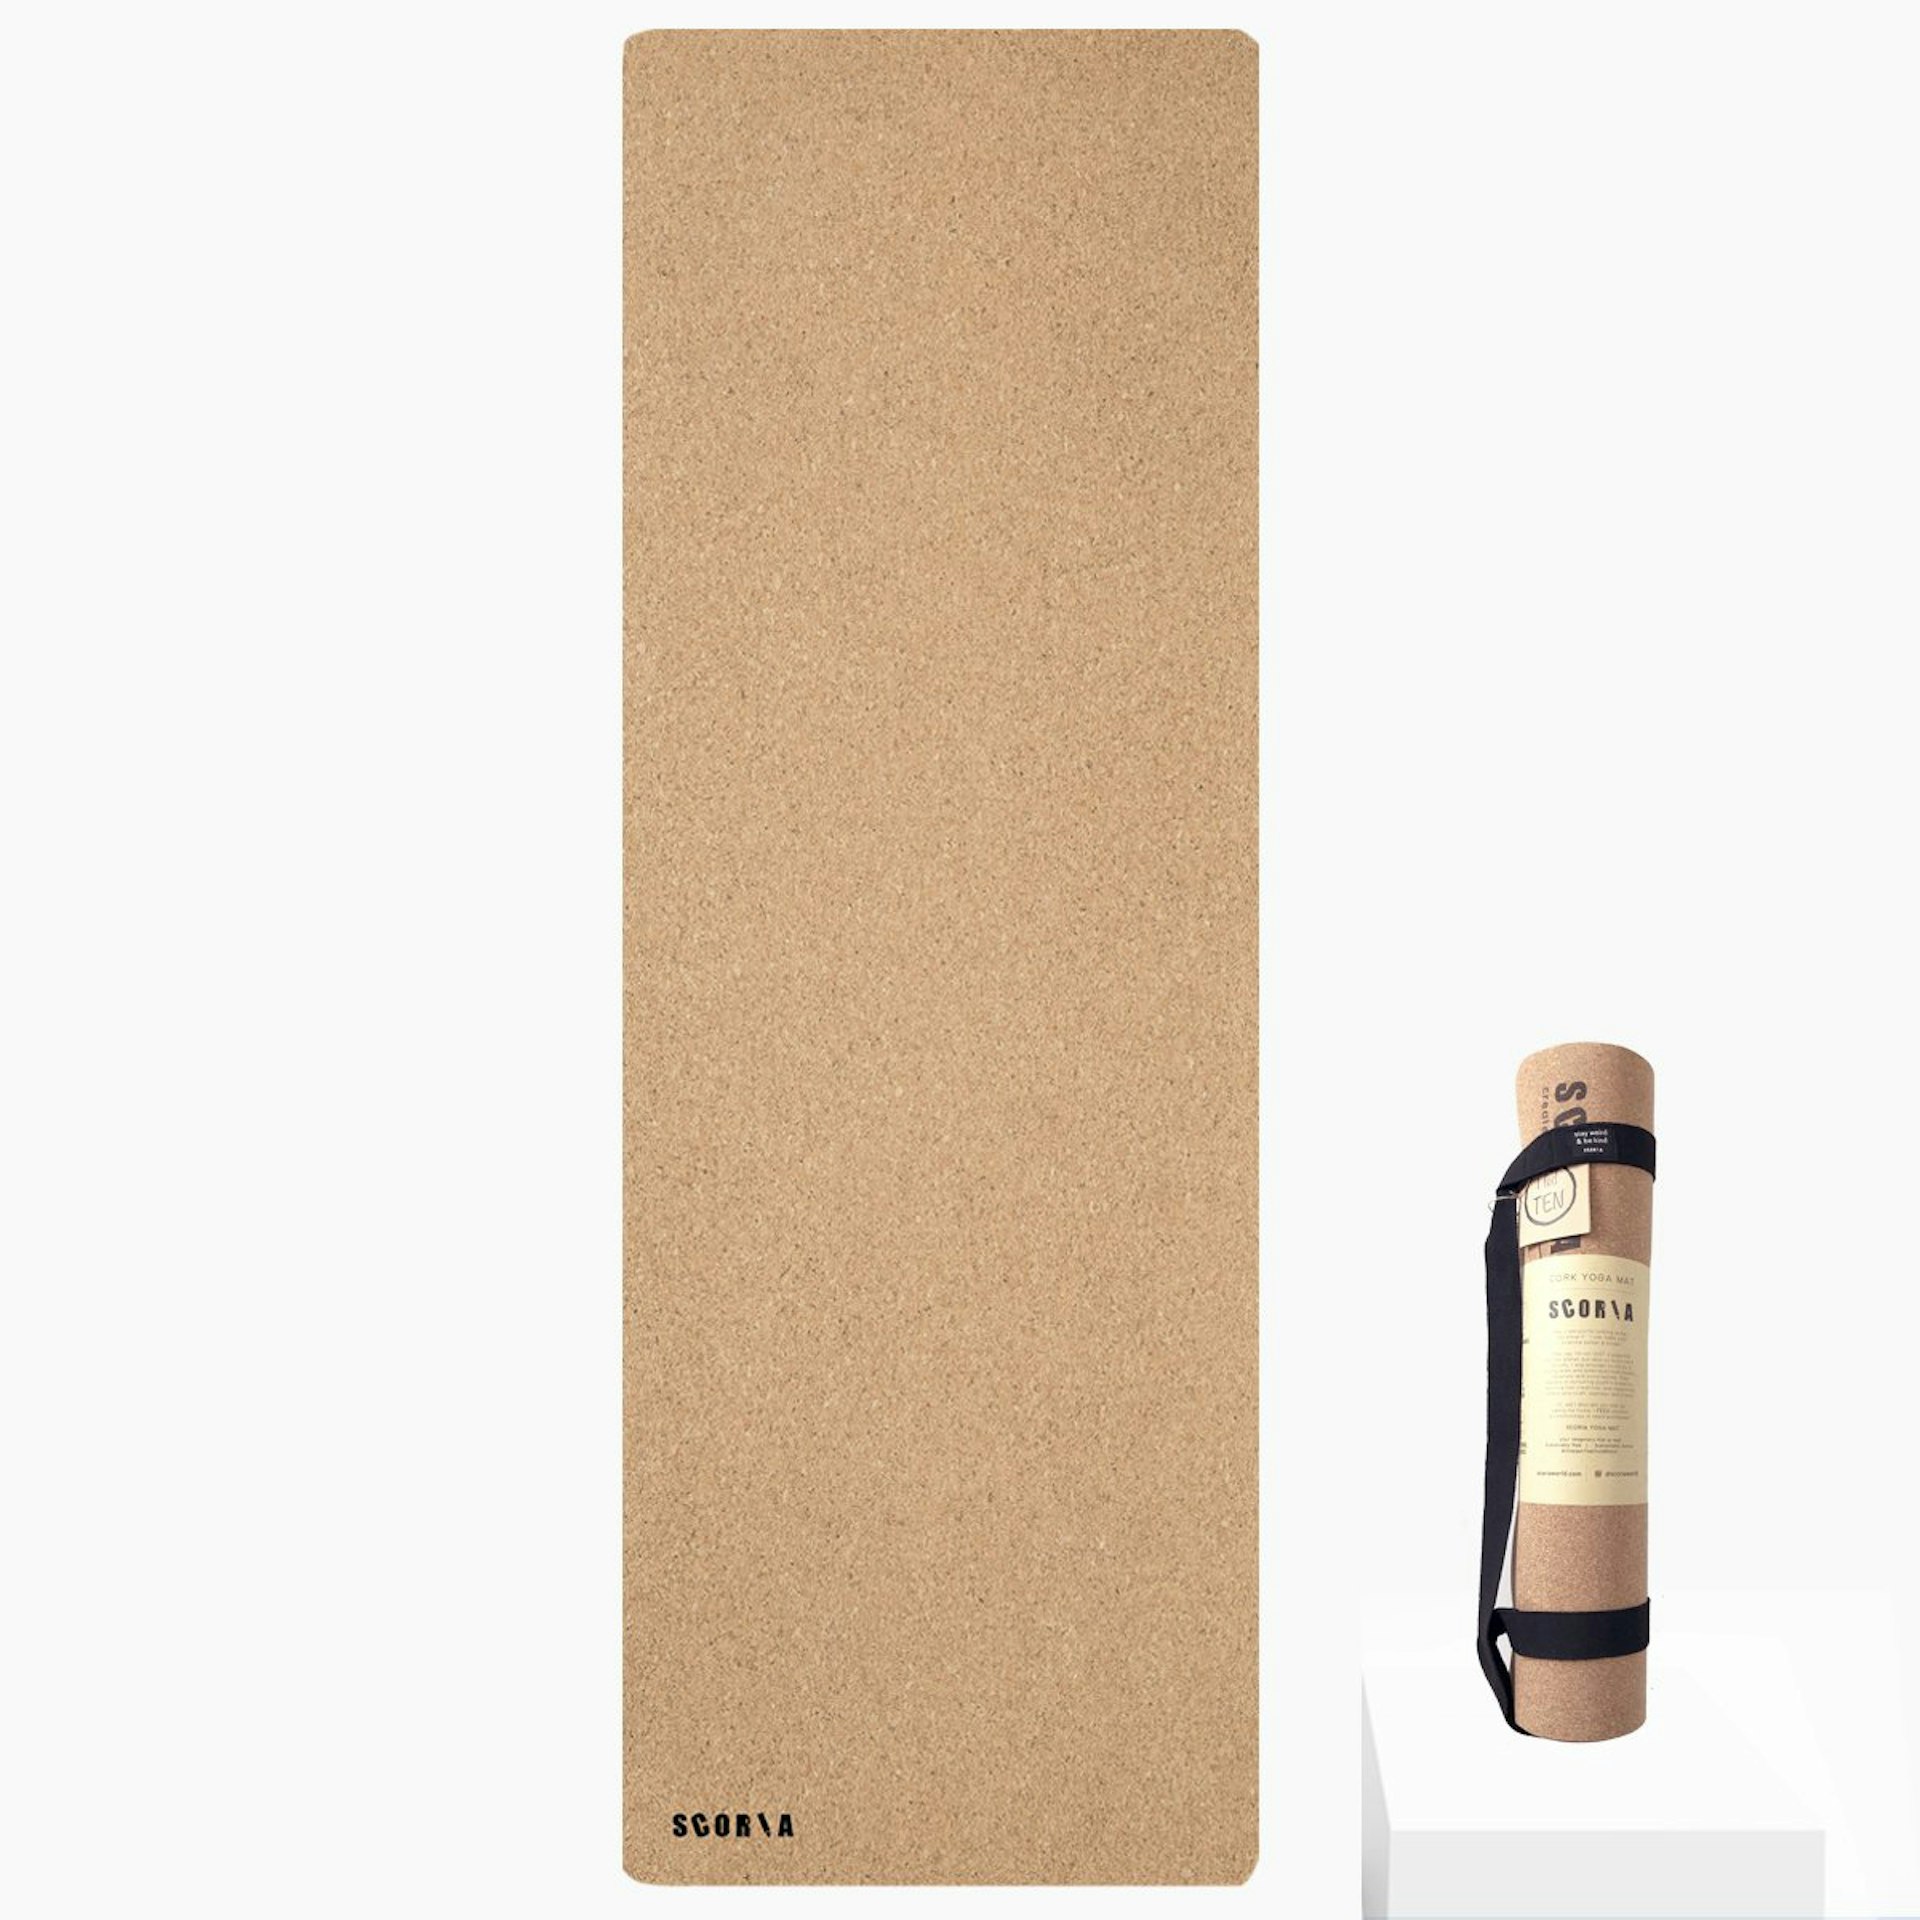 A brown cork yoga mat, seen both unrolled and rolled up 